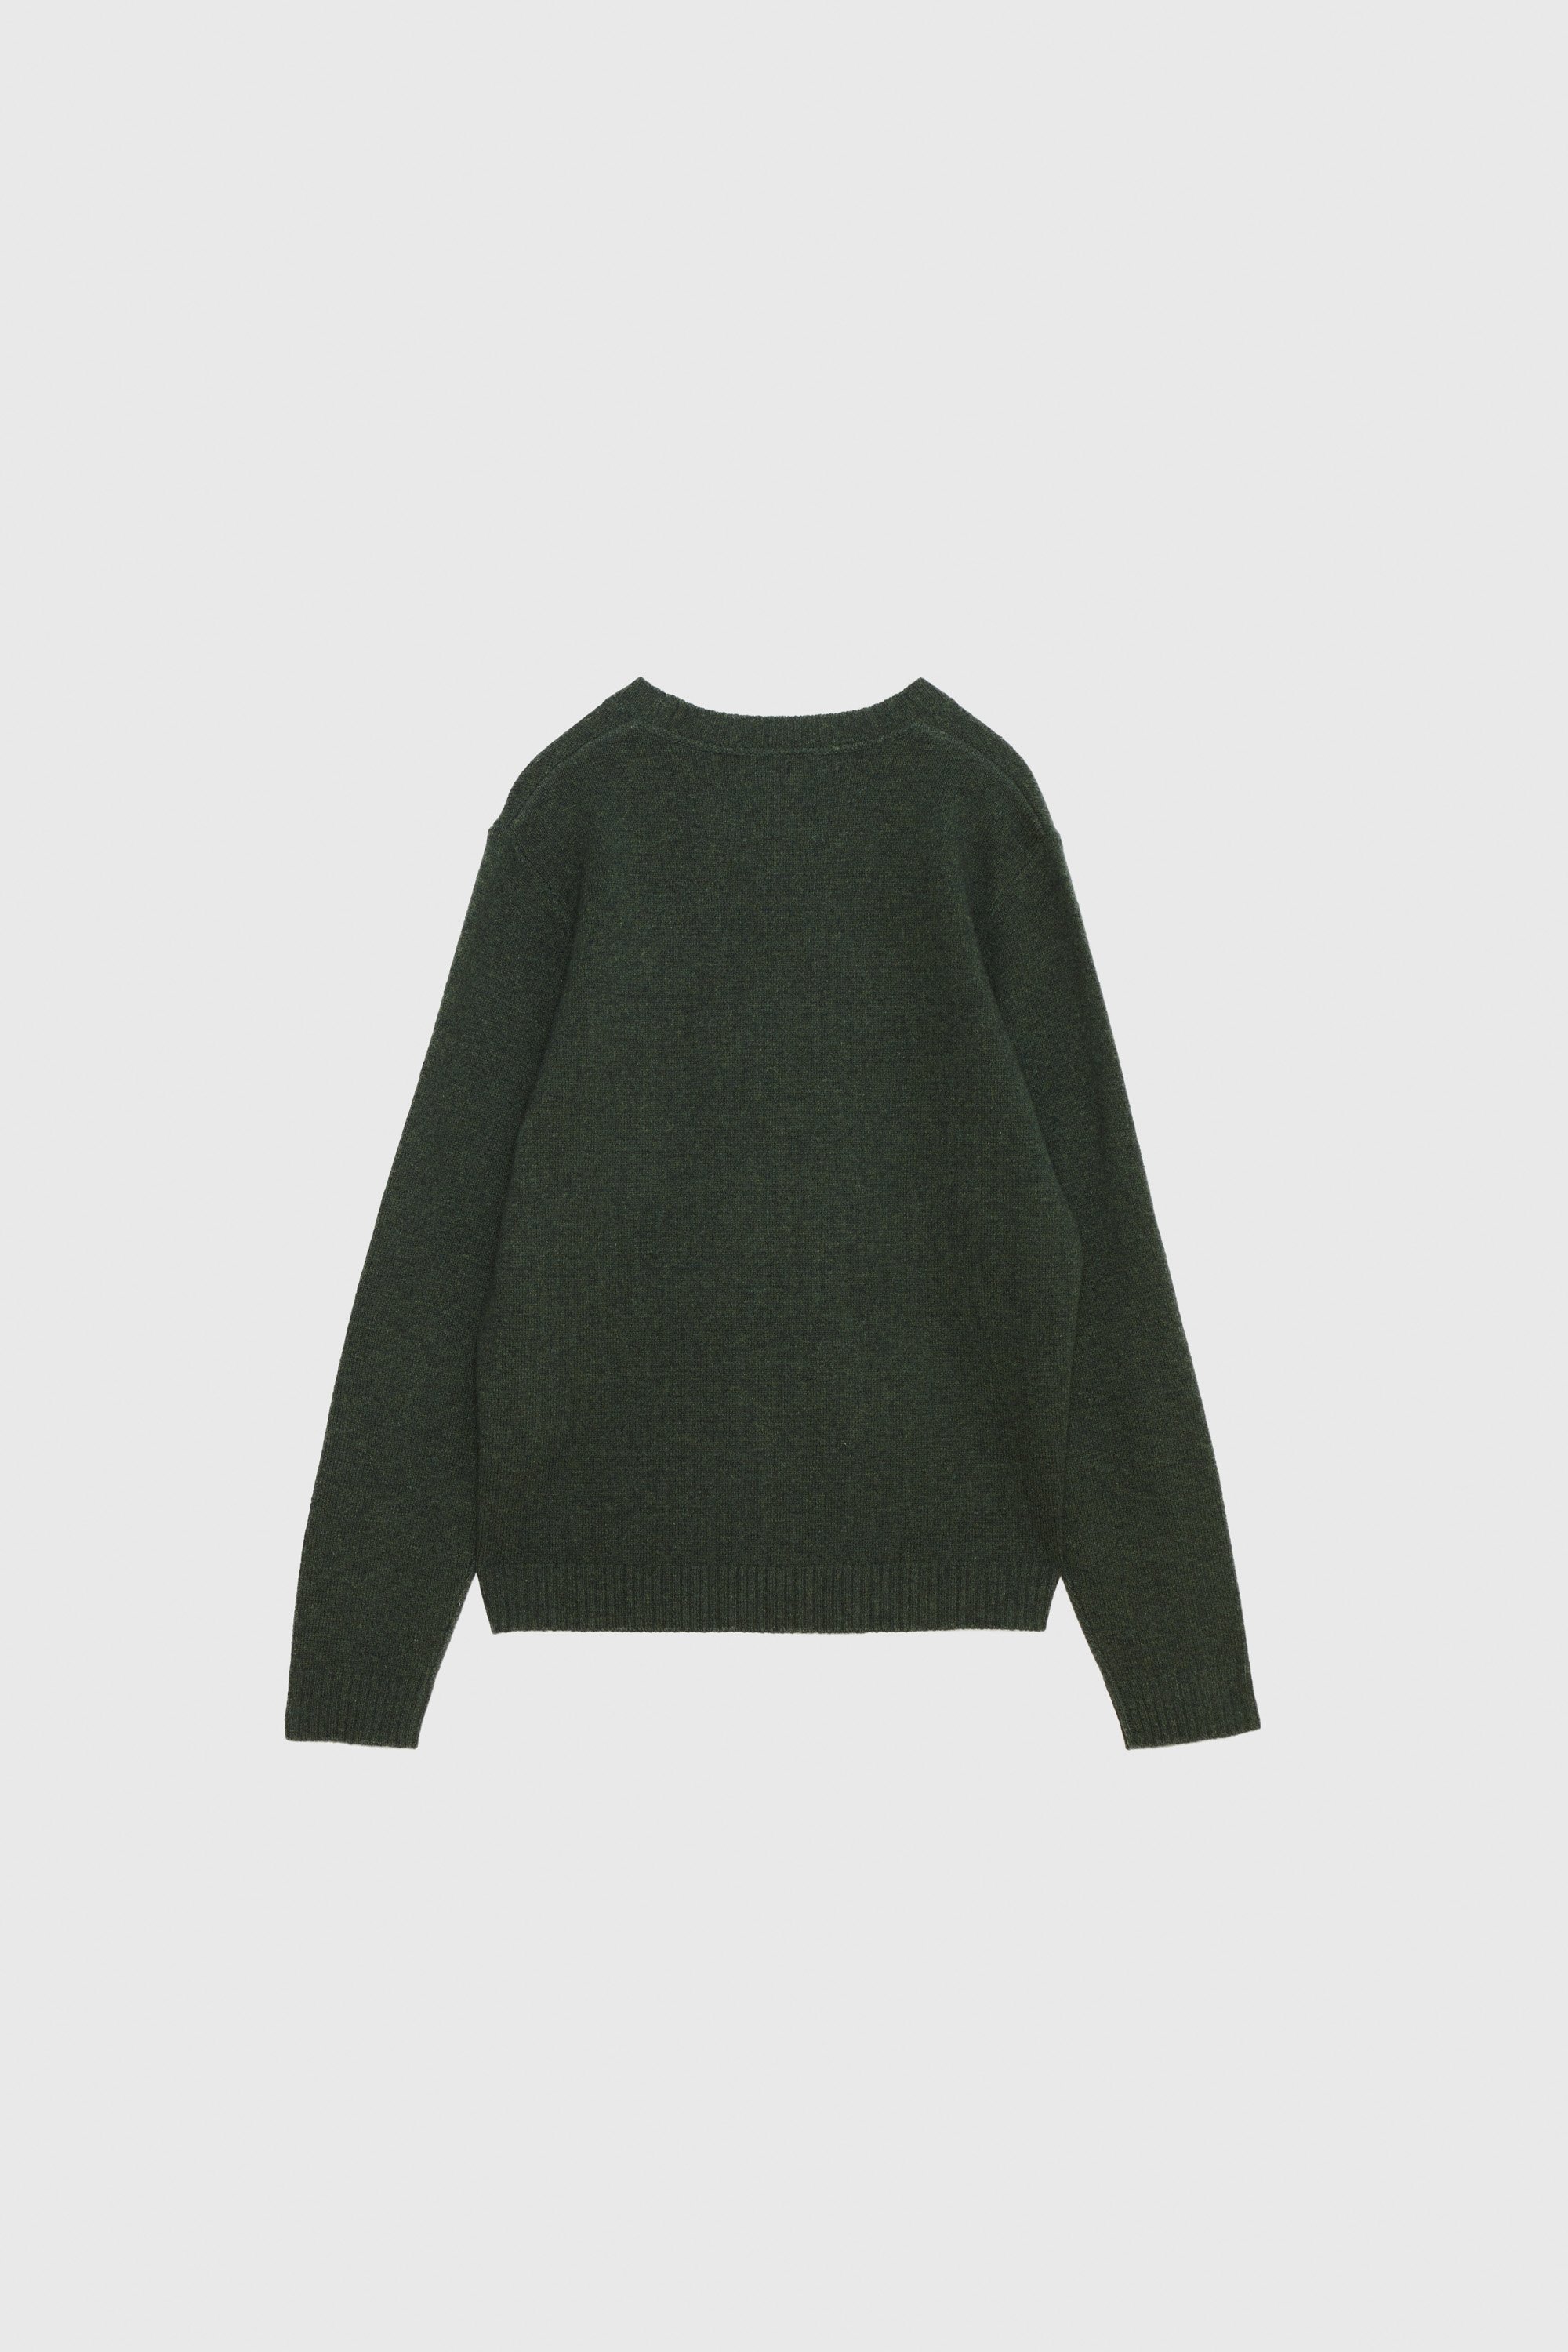 Double A by Wood Wood Tay AA CS patch lambswool jumper Eden Green ...